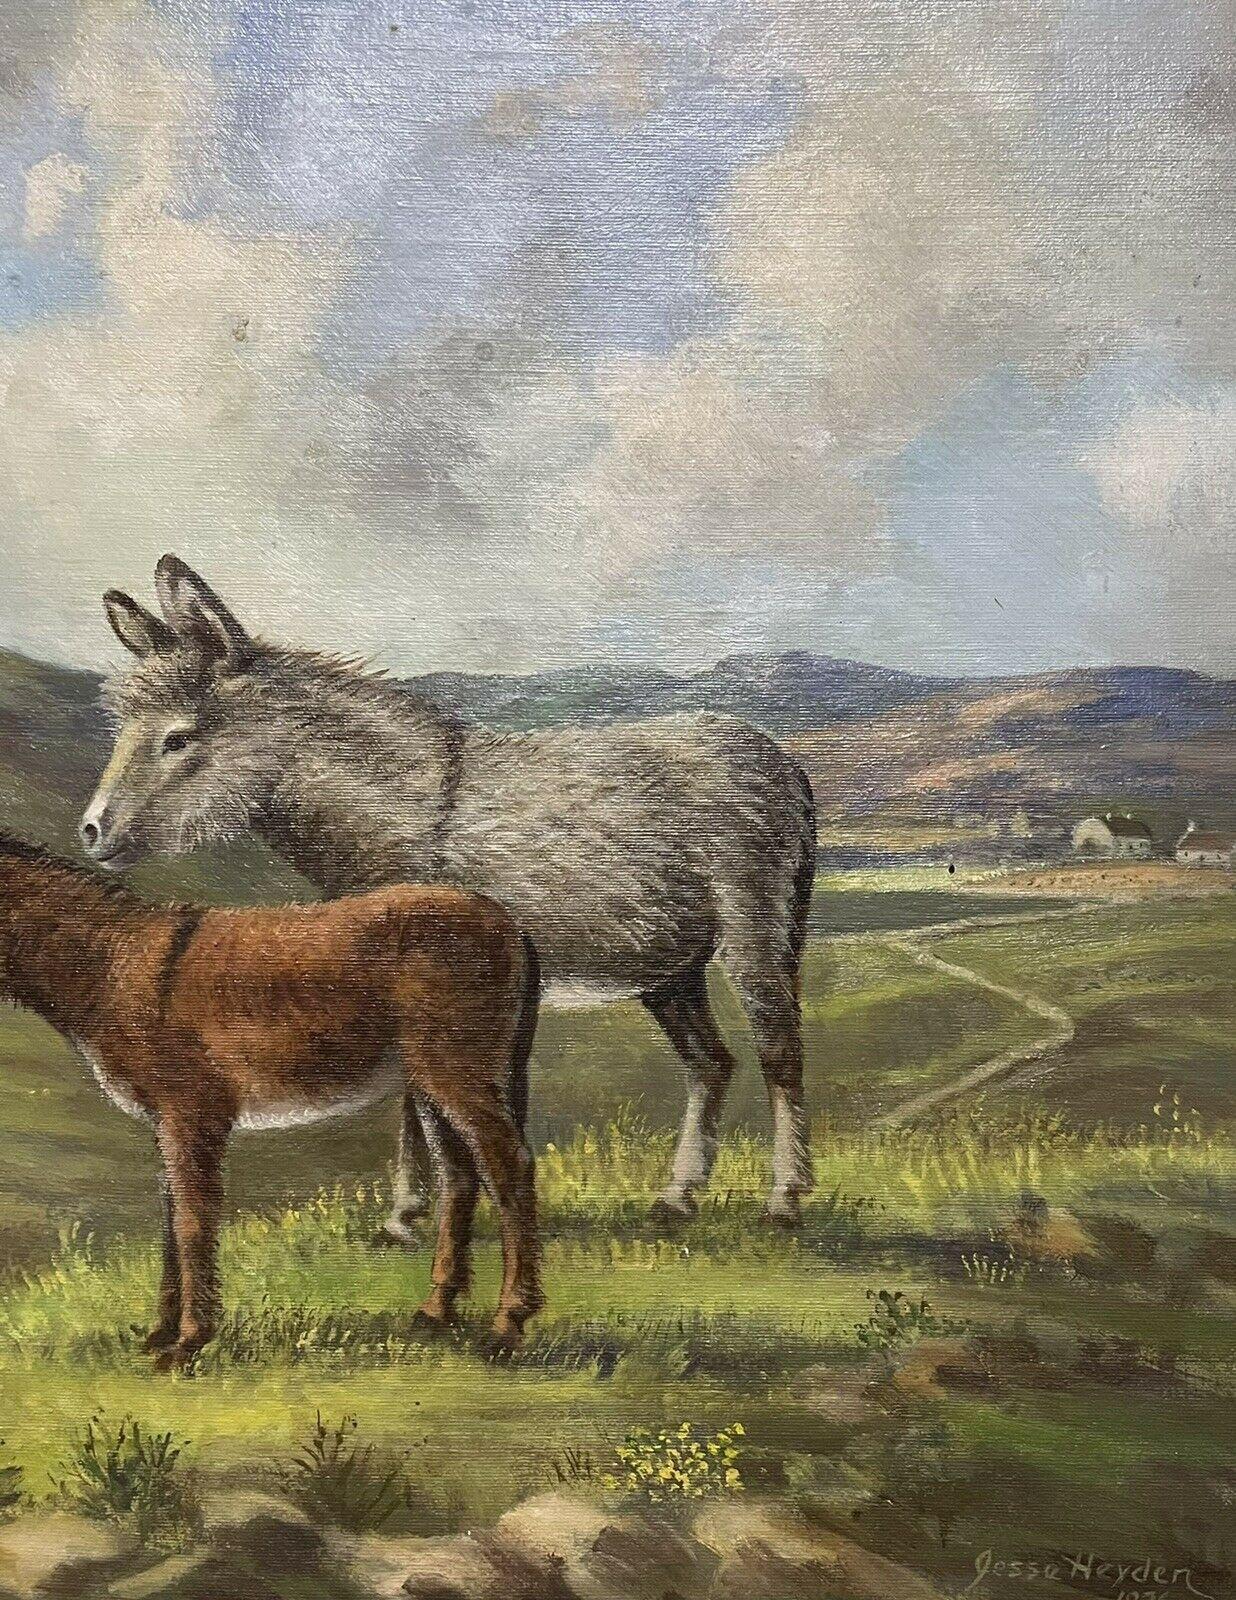 VINTAGE IRISH SIGNED OIL PAINTING - DONKEYS STANDING IN CO. DOWN LANDSCAPE FIELD - Painting by Irish School